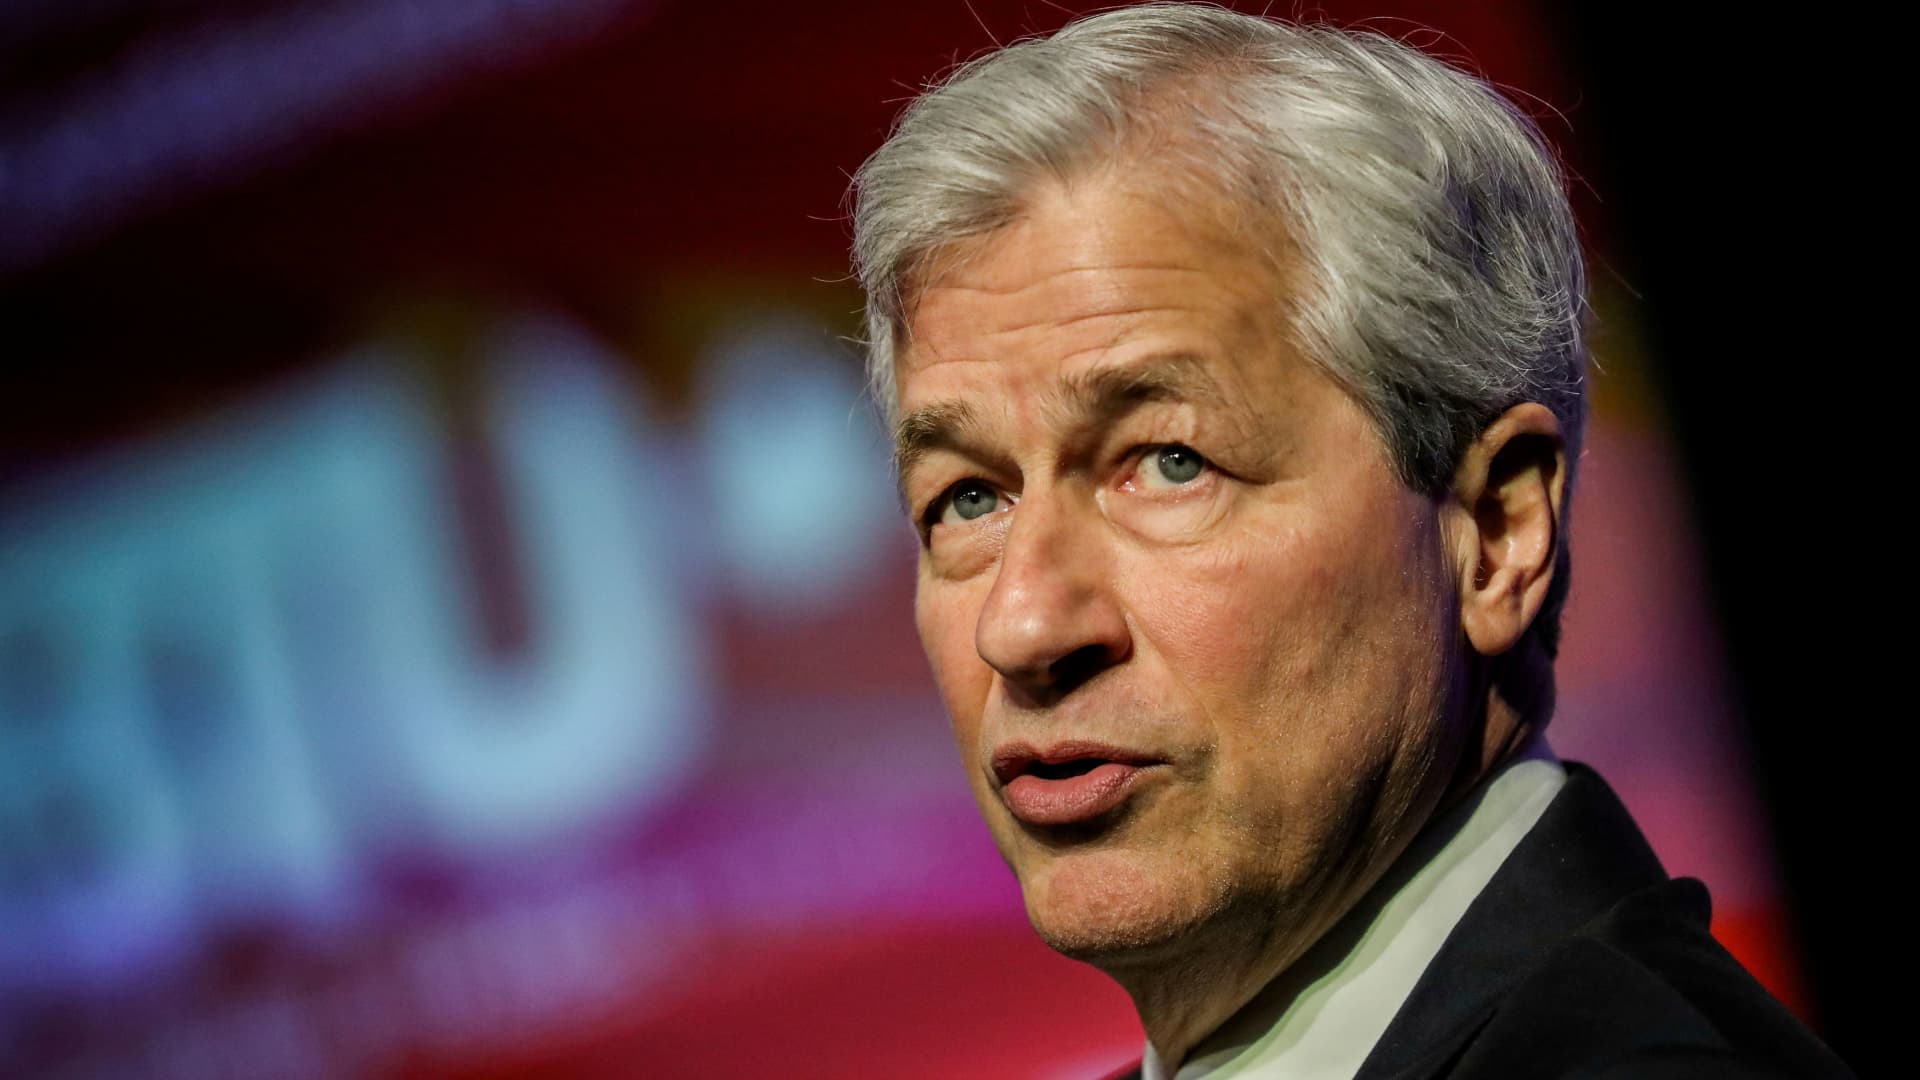 JPMorgan Chase says second-quarter profit fell 28% after building reserves for b..